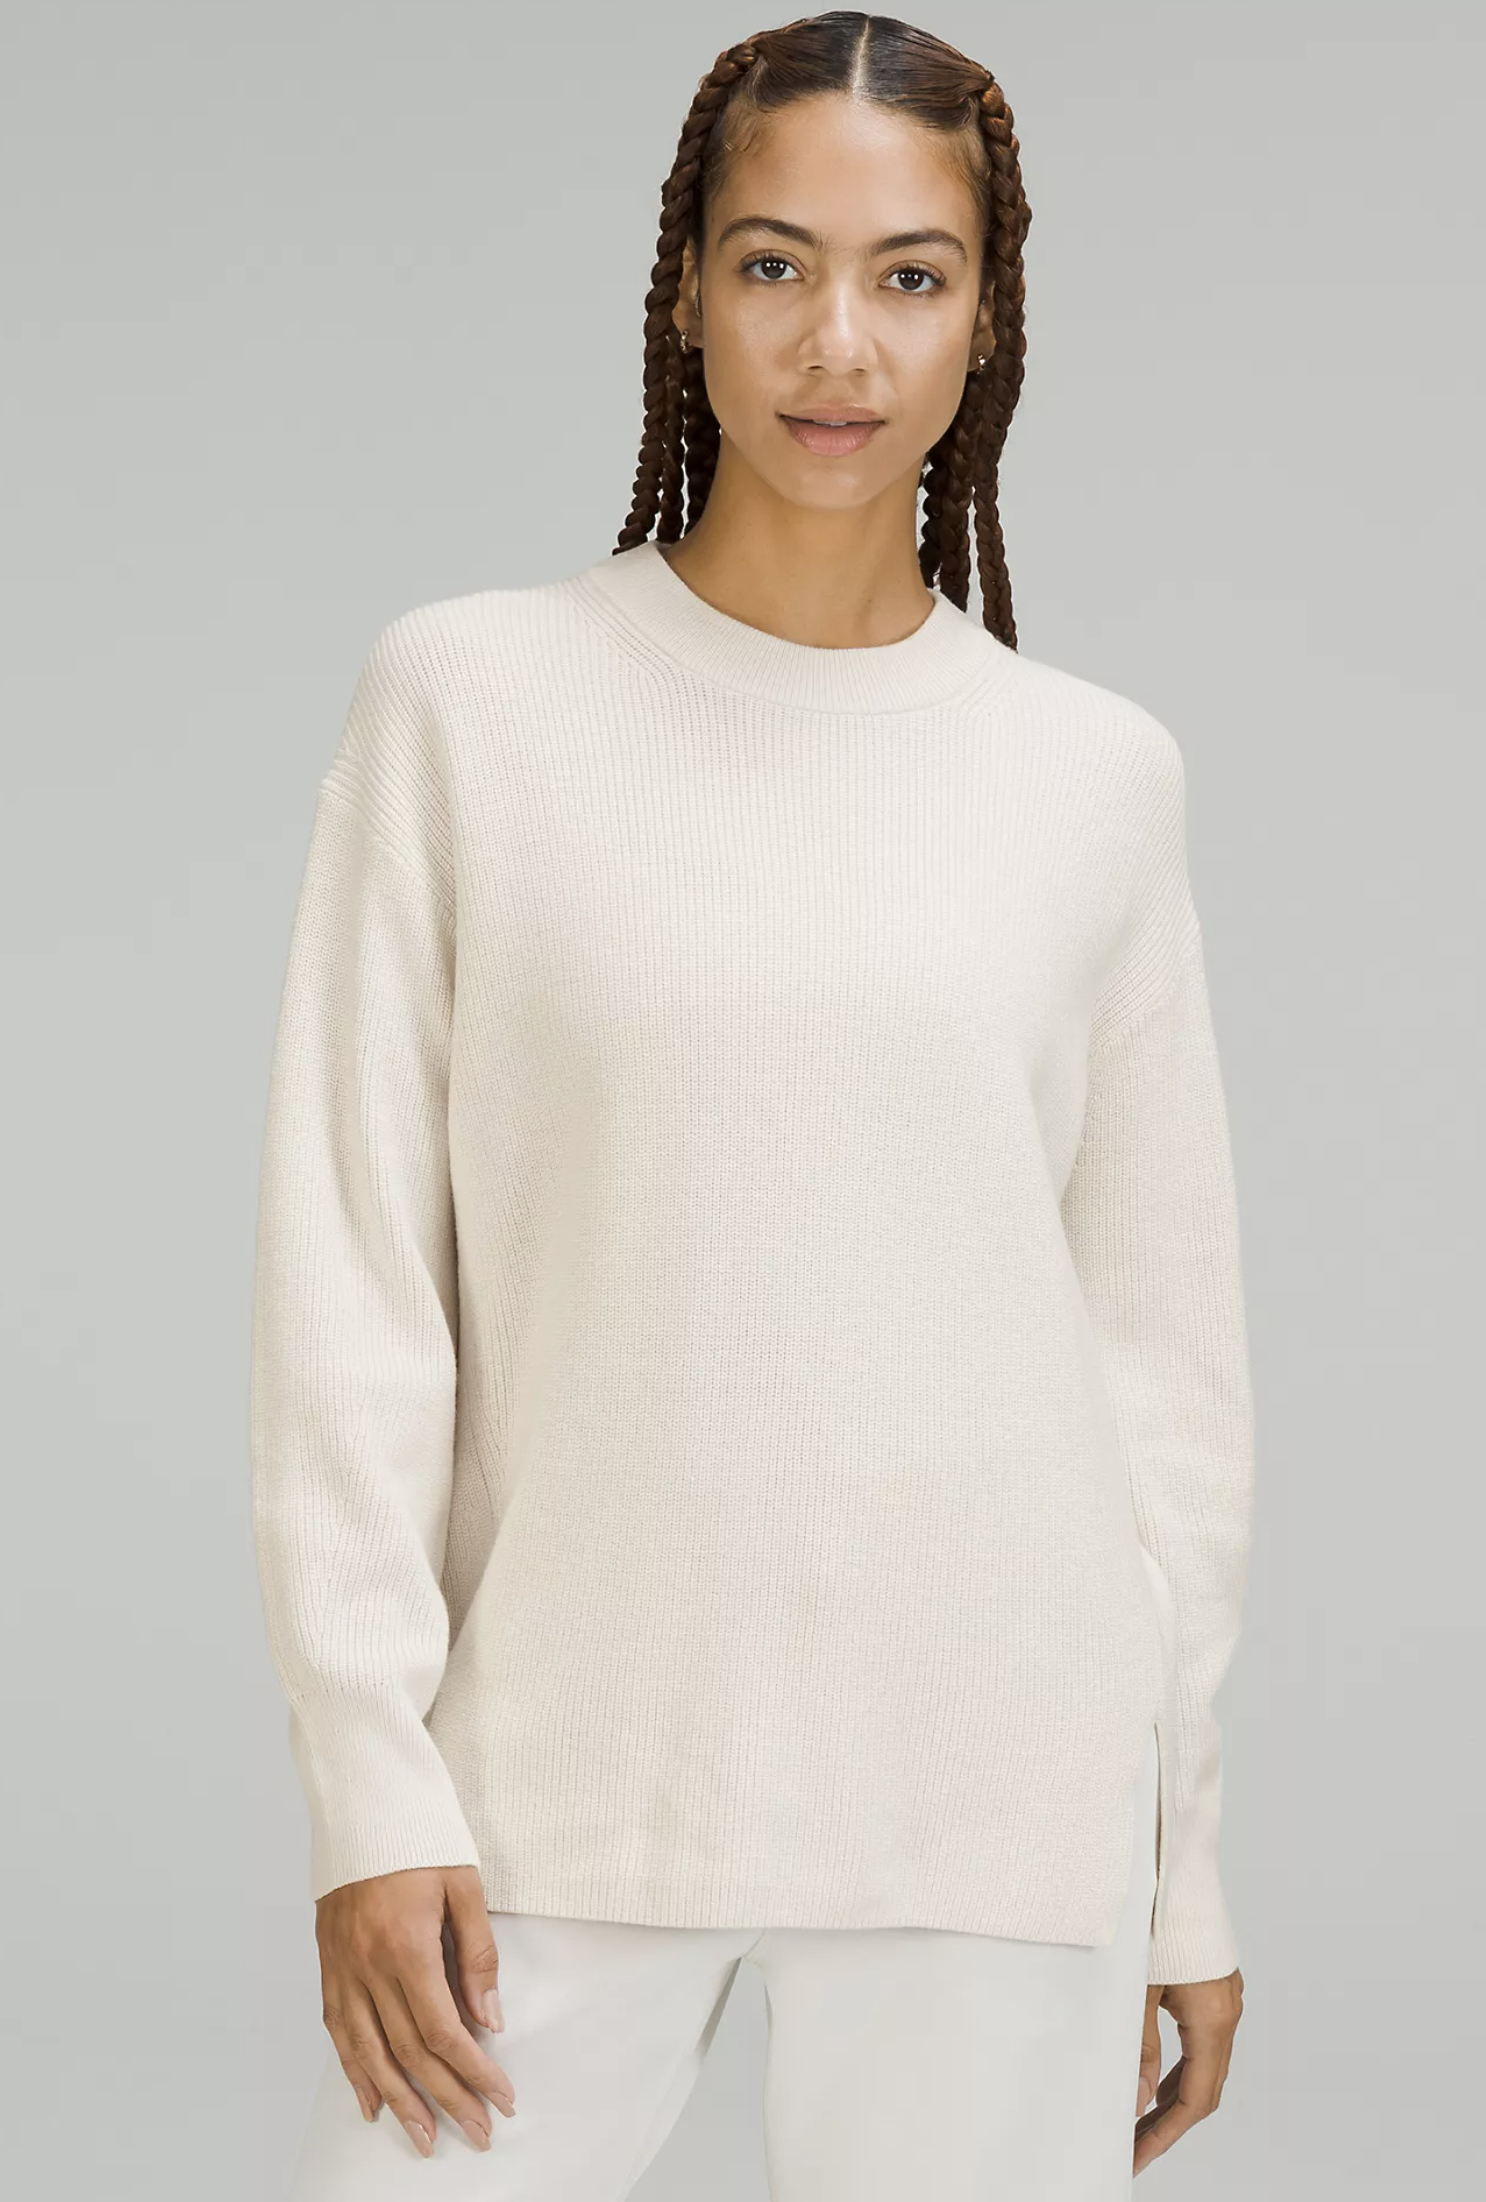 a model wearing the sweater in white